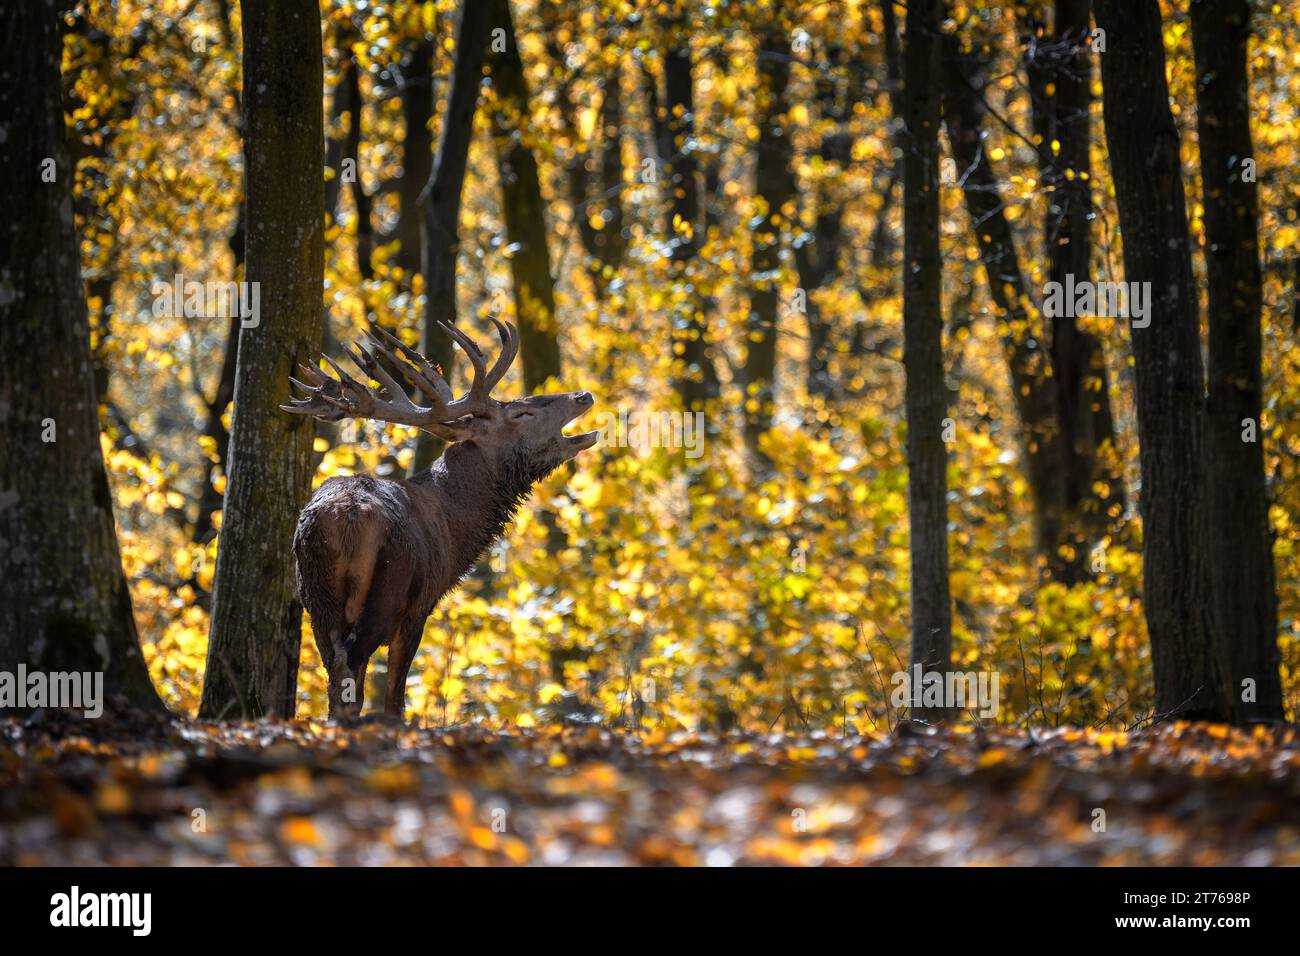 Majestic deer with big horns stag in autumn forest. Wildlife scene from nature Stock Photo